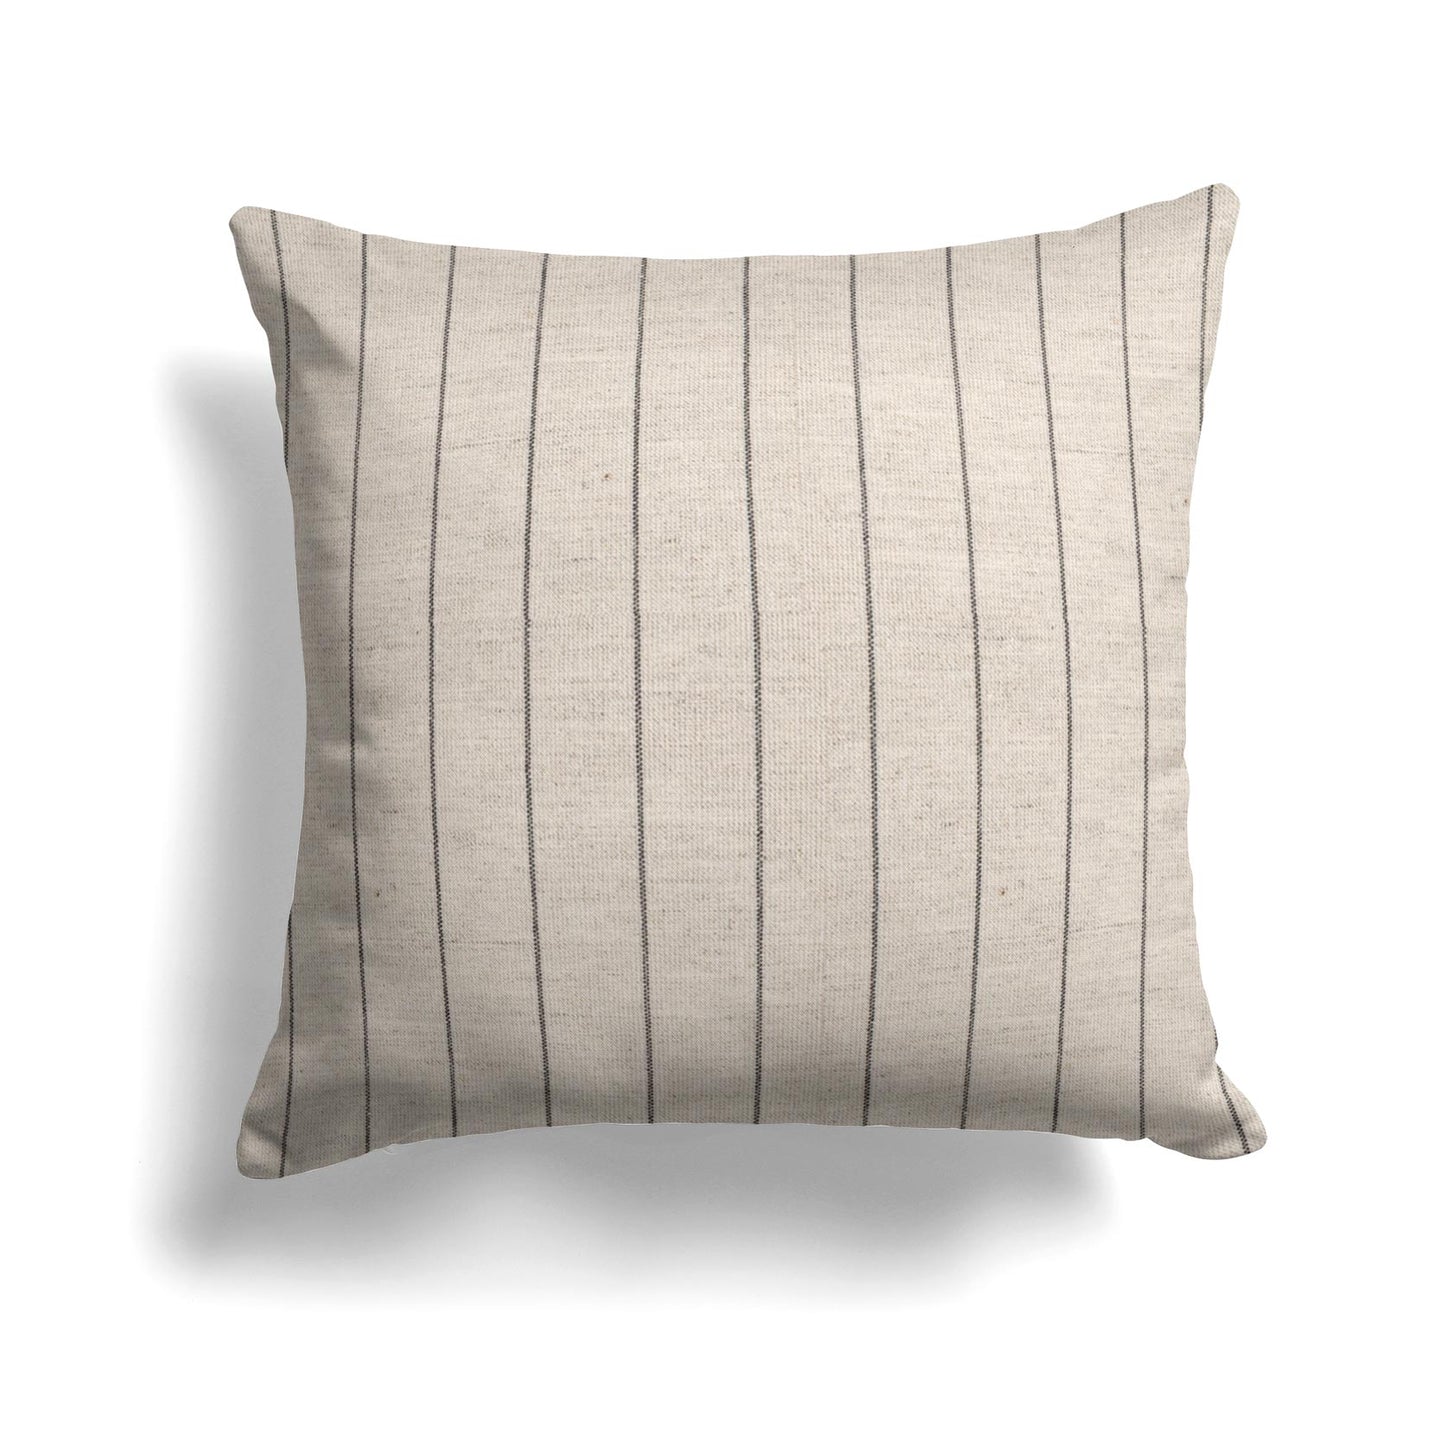 Striped Linen Pillow Cover in Black